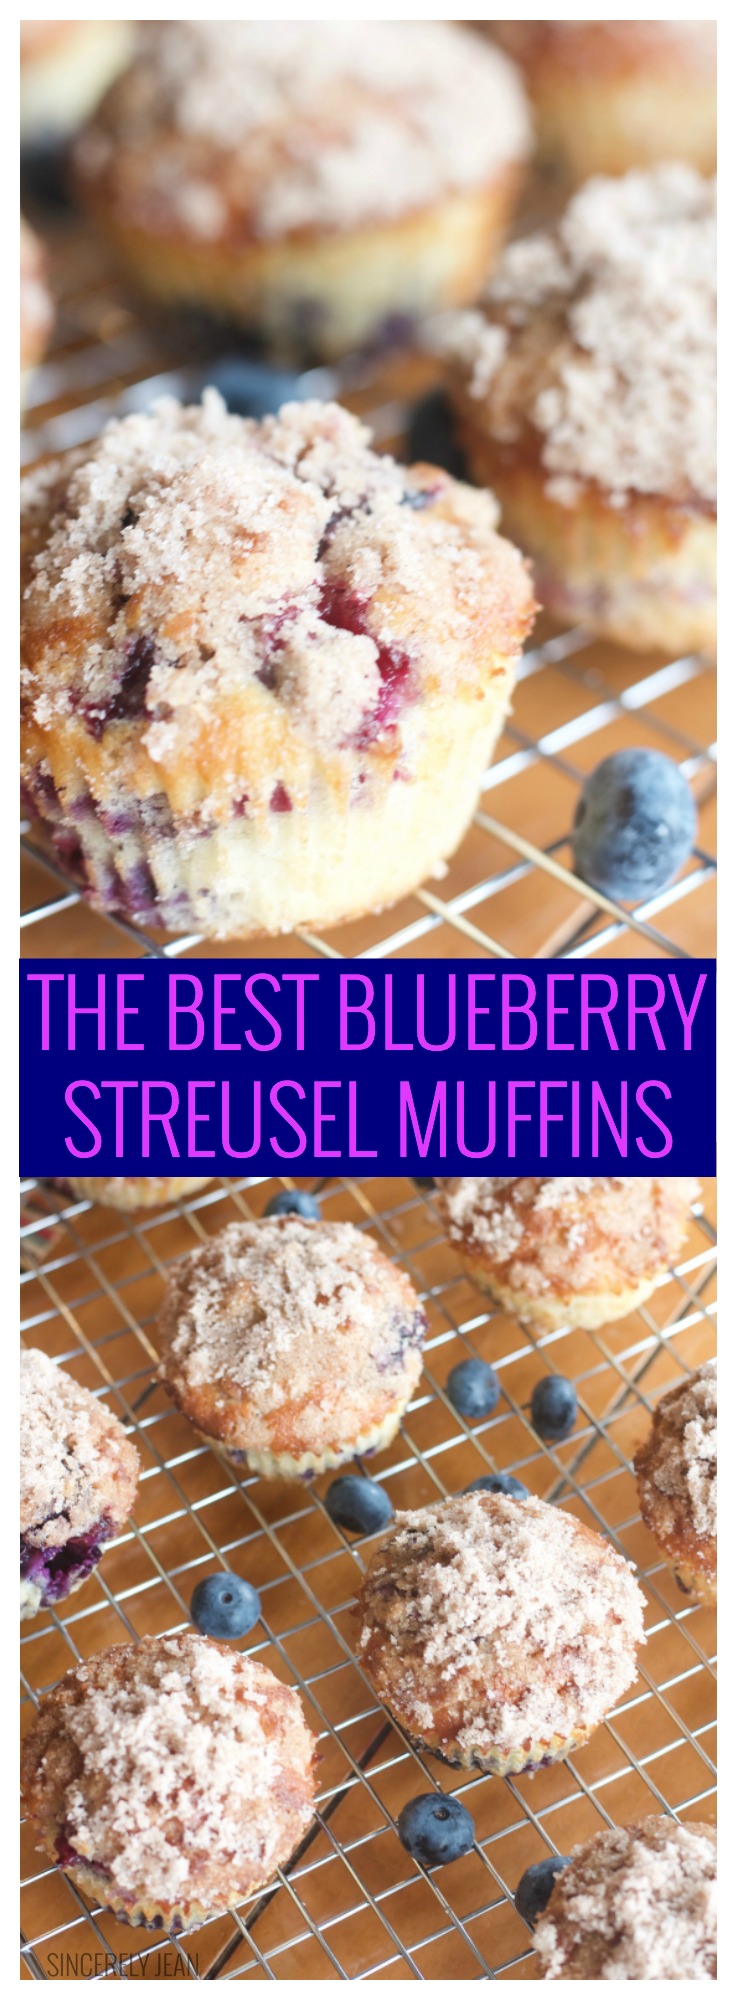 The Best Blueberry Streusel Muffins